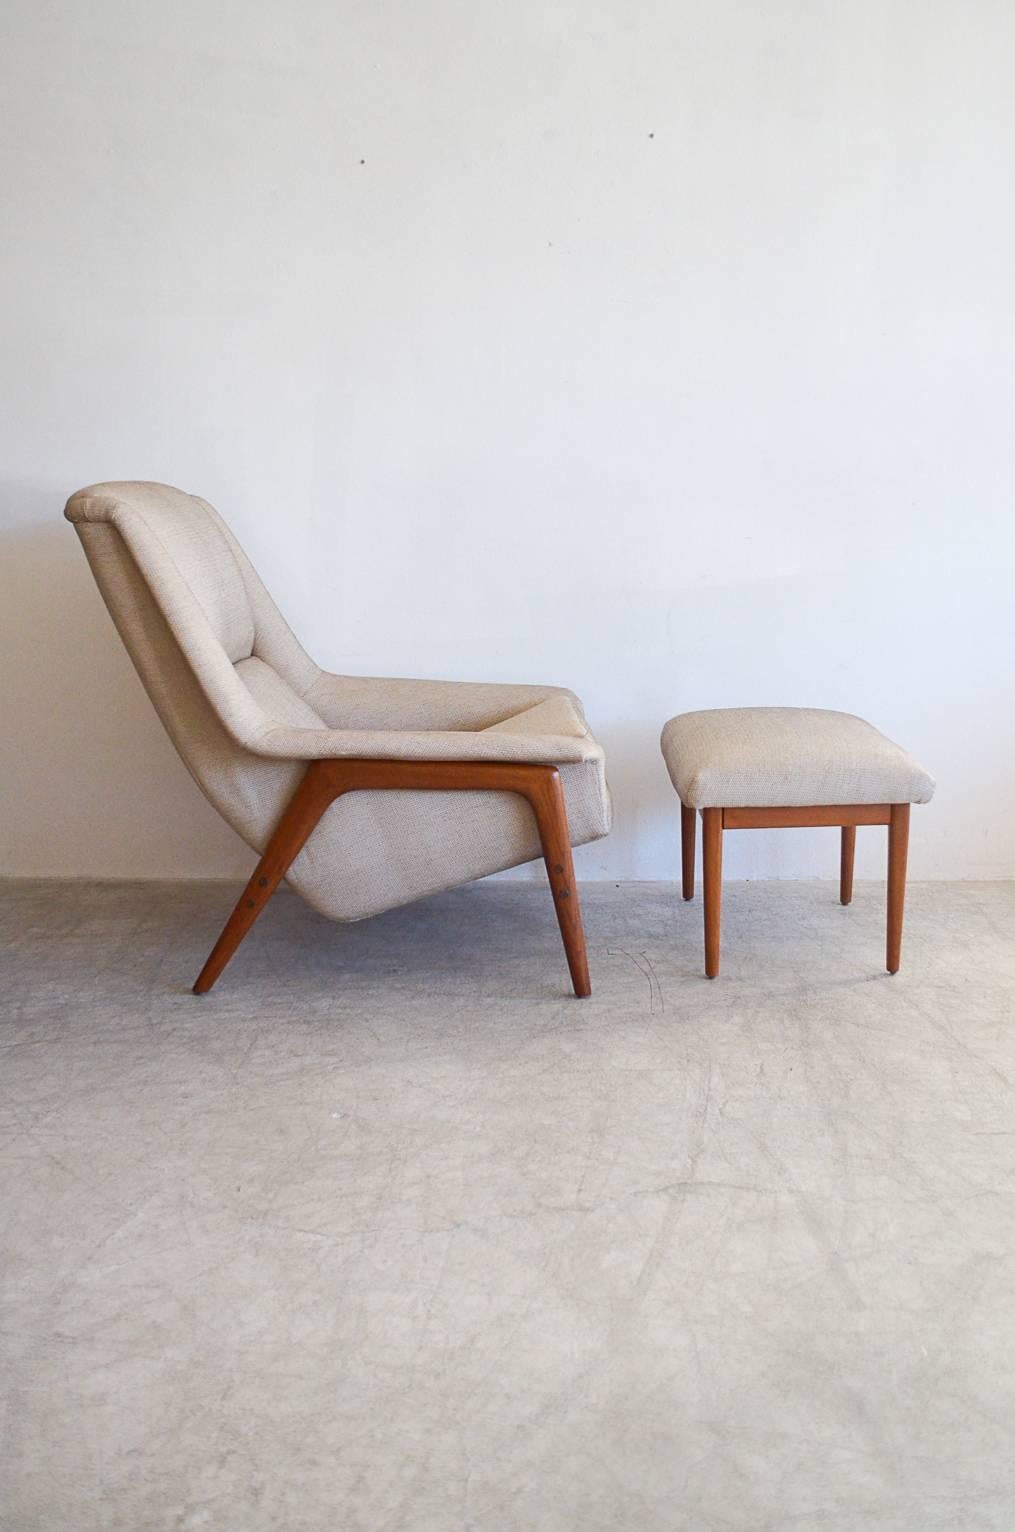 Large teak frame lounge chair and ottoman by Folke Ohlsson for Dux of Sweden. Chair has been professionally restored with beautiful teakwood frame and new foam and classic beige textured upholstery.
Measures: 34